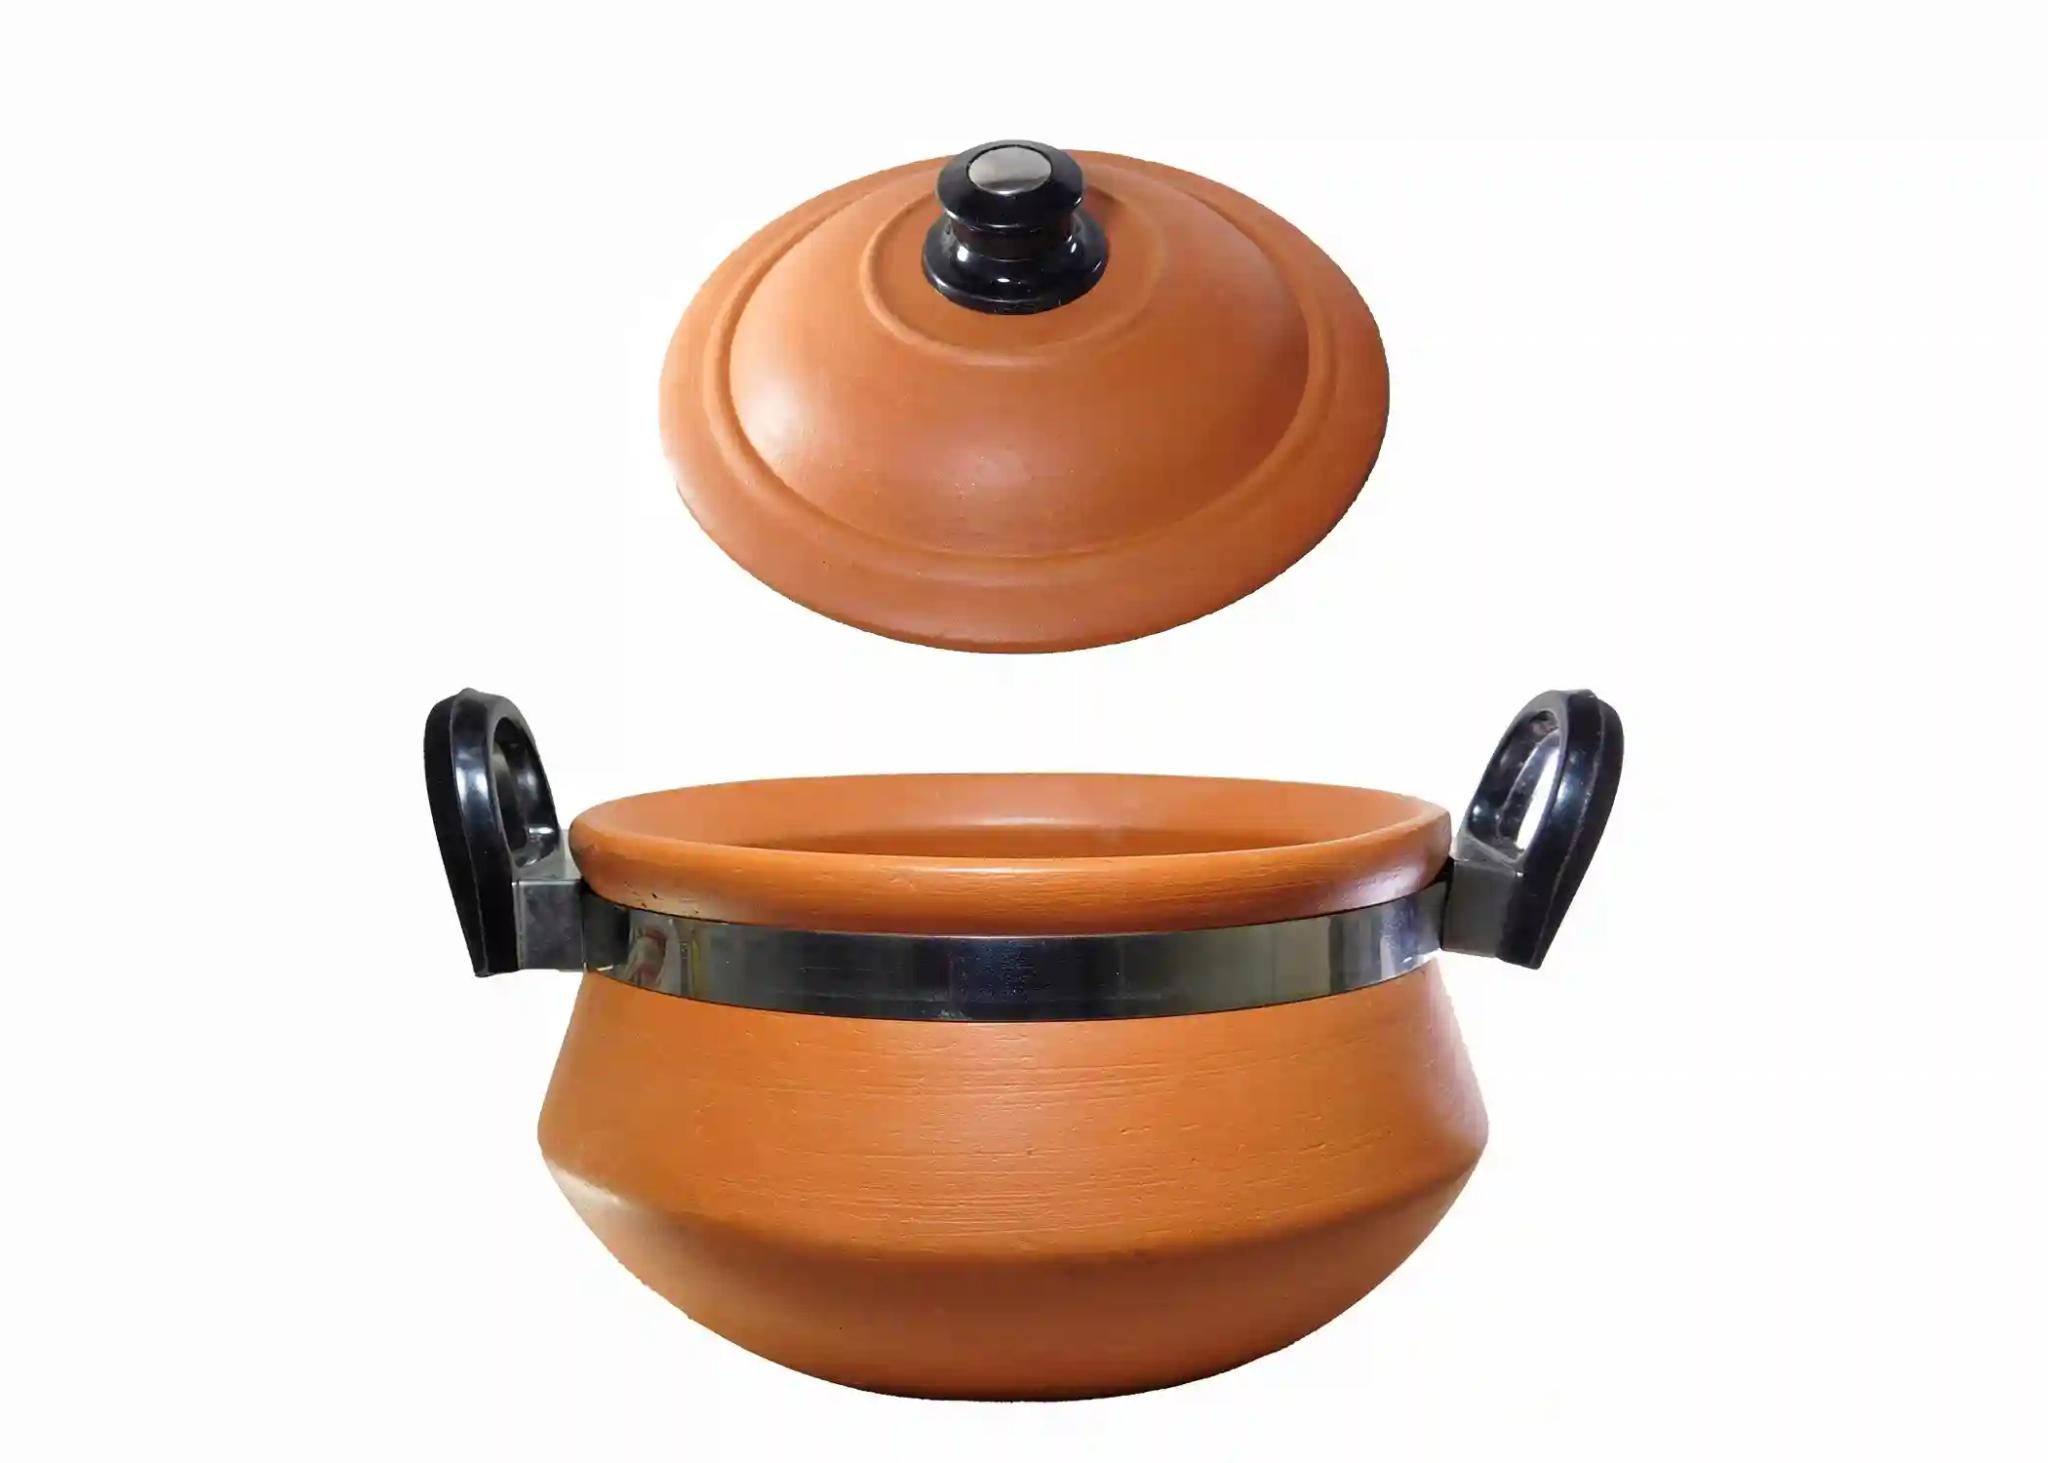 KSI Handi for Cooking and Serving with Lid Serving Bowl Wooden Spatula Combo Clay Pot Terracotta Handmade Mud Mitti Ke Bartan Pot Uncoated Pottery Storage Earthen India 3.5 Litre Lightweight & Durable